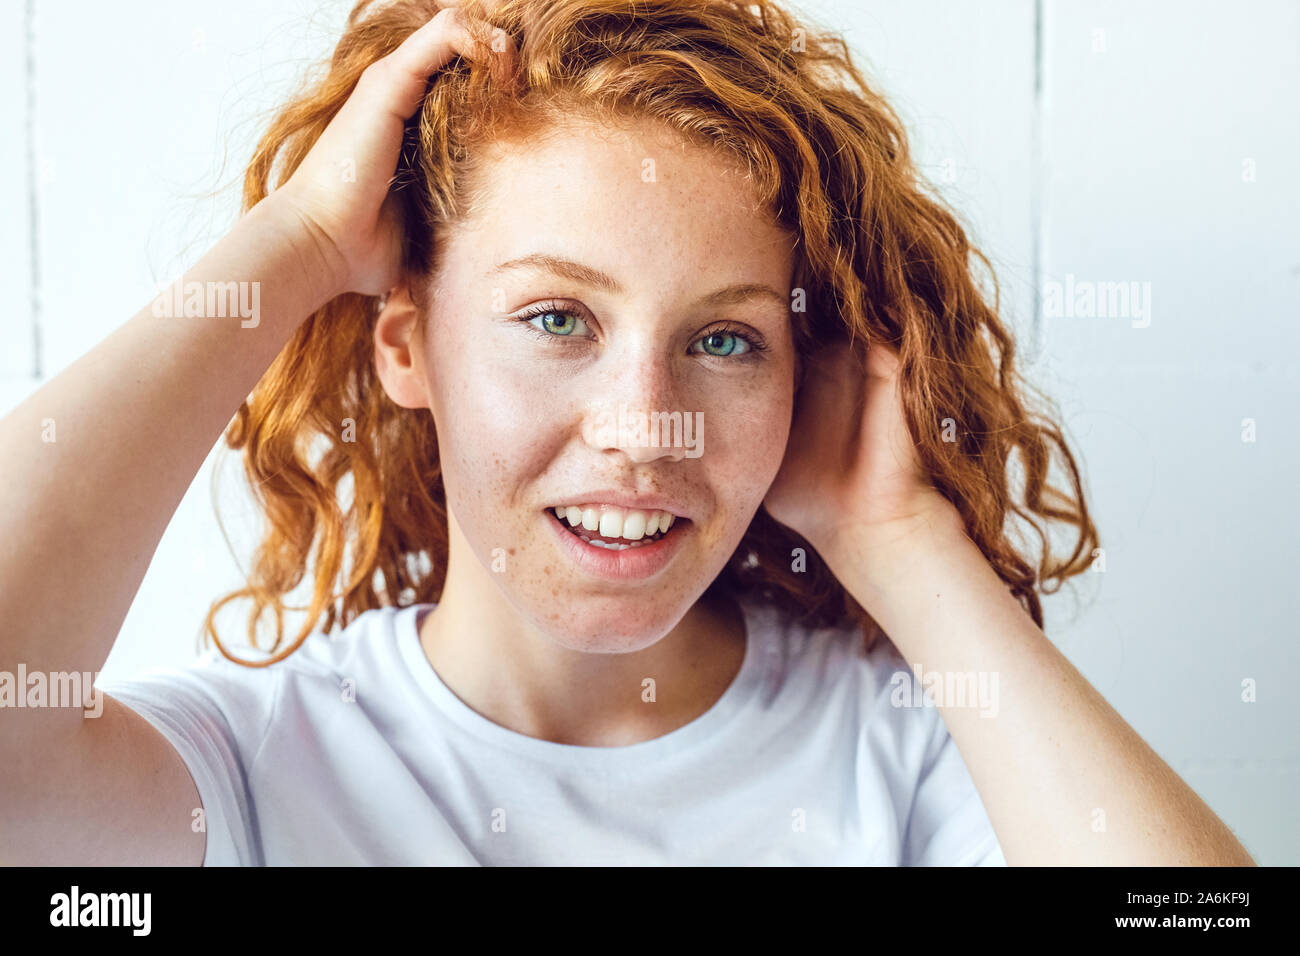 Beautiful smiling redhead girl with freckles. Stock Photo